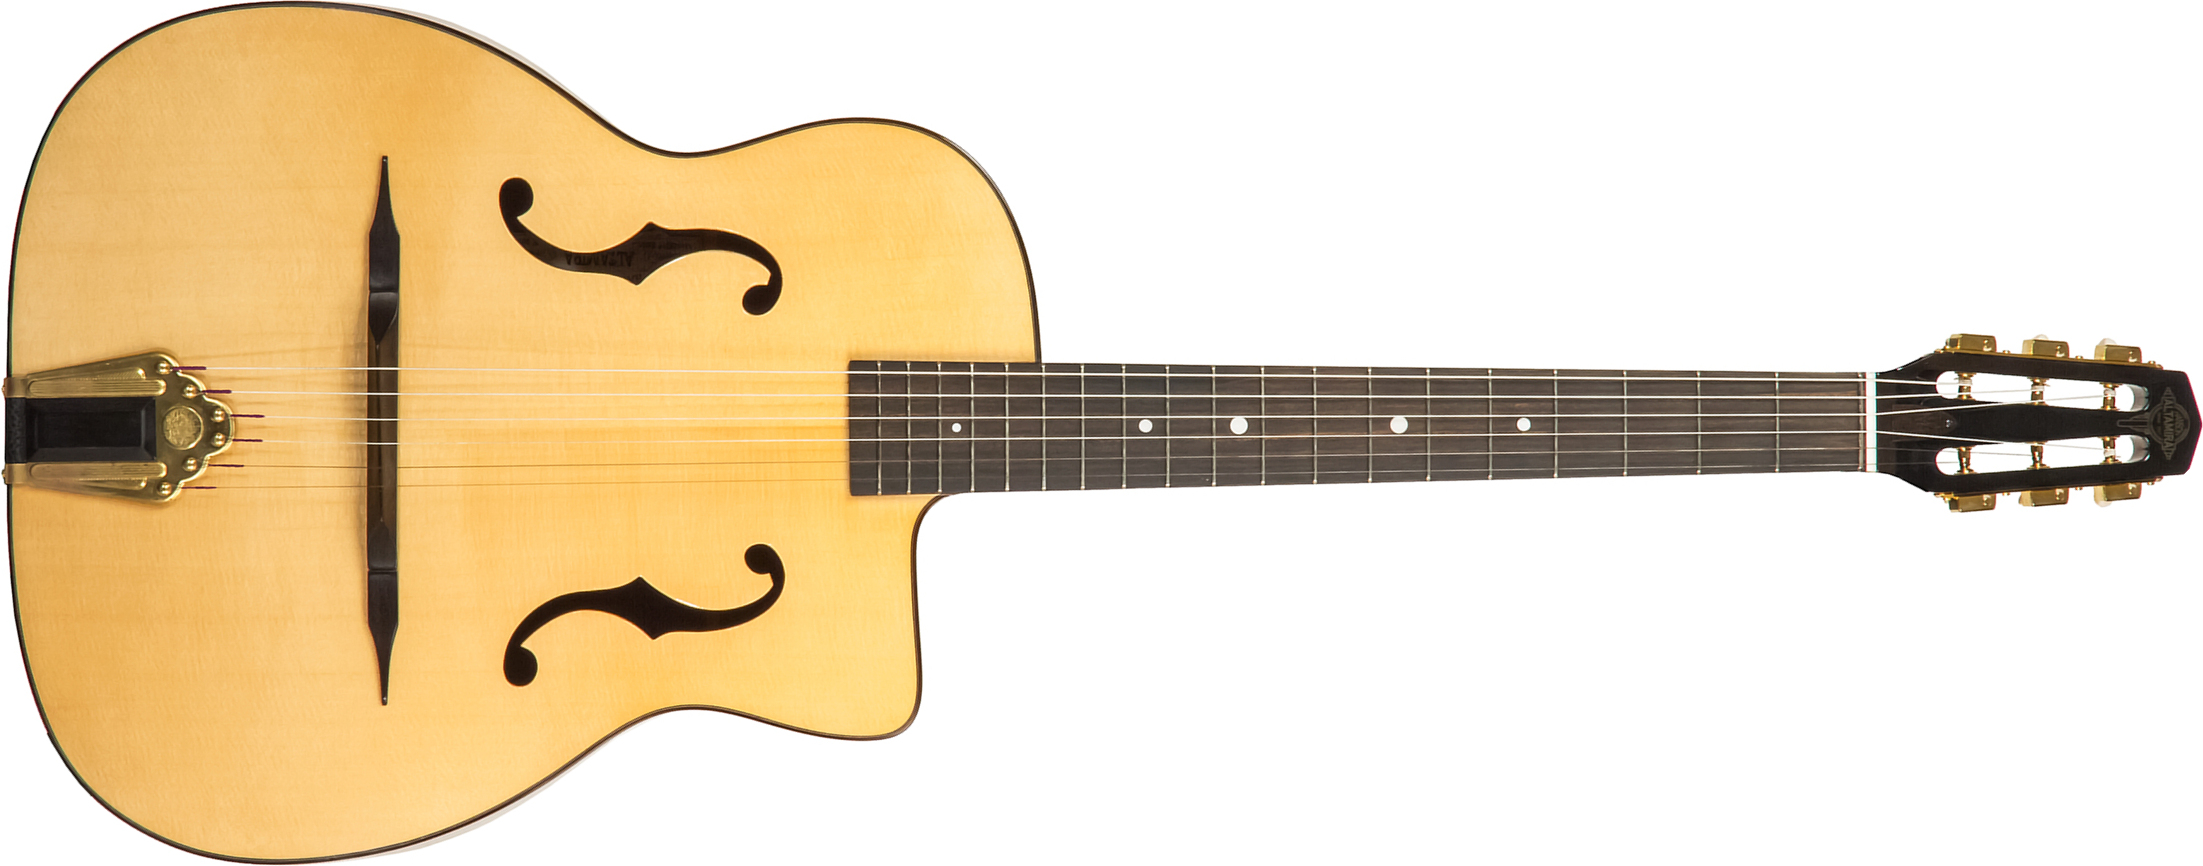 Altamira M01f Gypsy Jazz Cw Epicea Palissandre Eb - Natural Satin - Gypsy guitar - Main picture